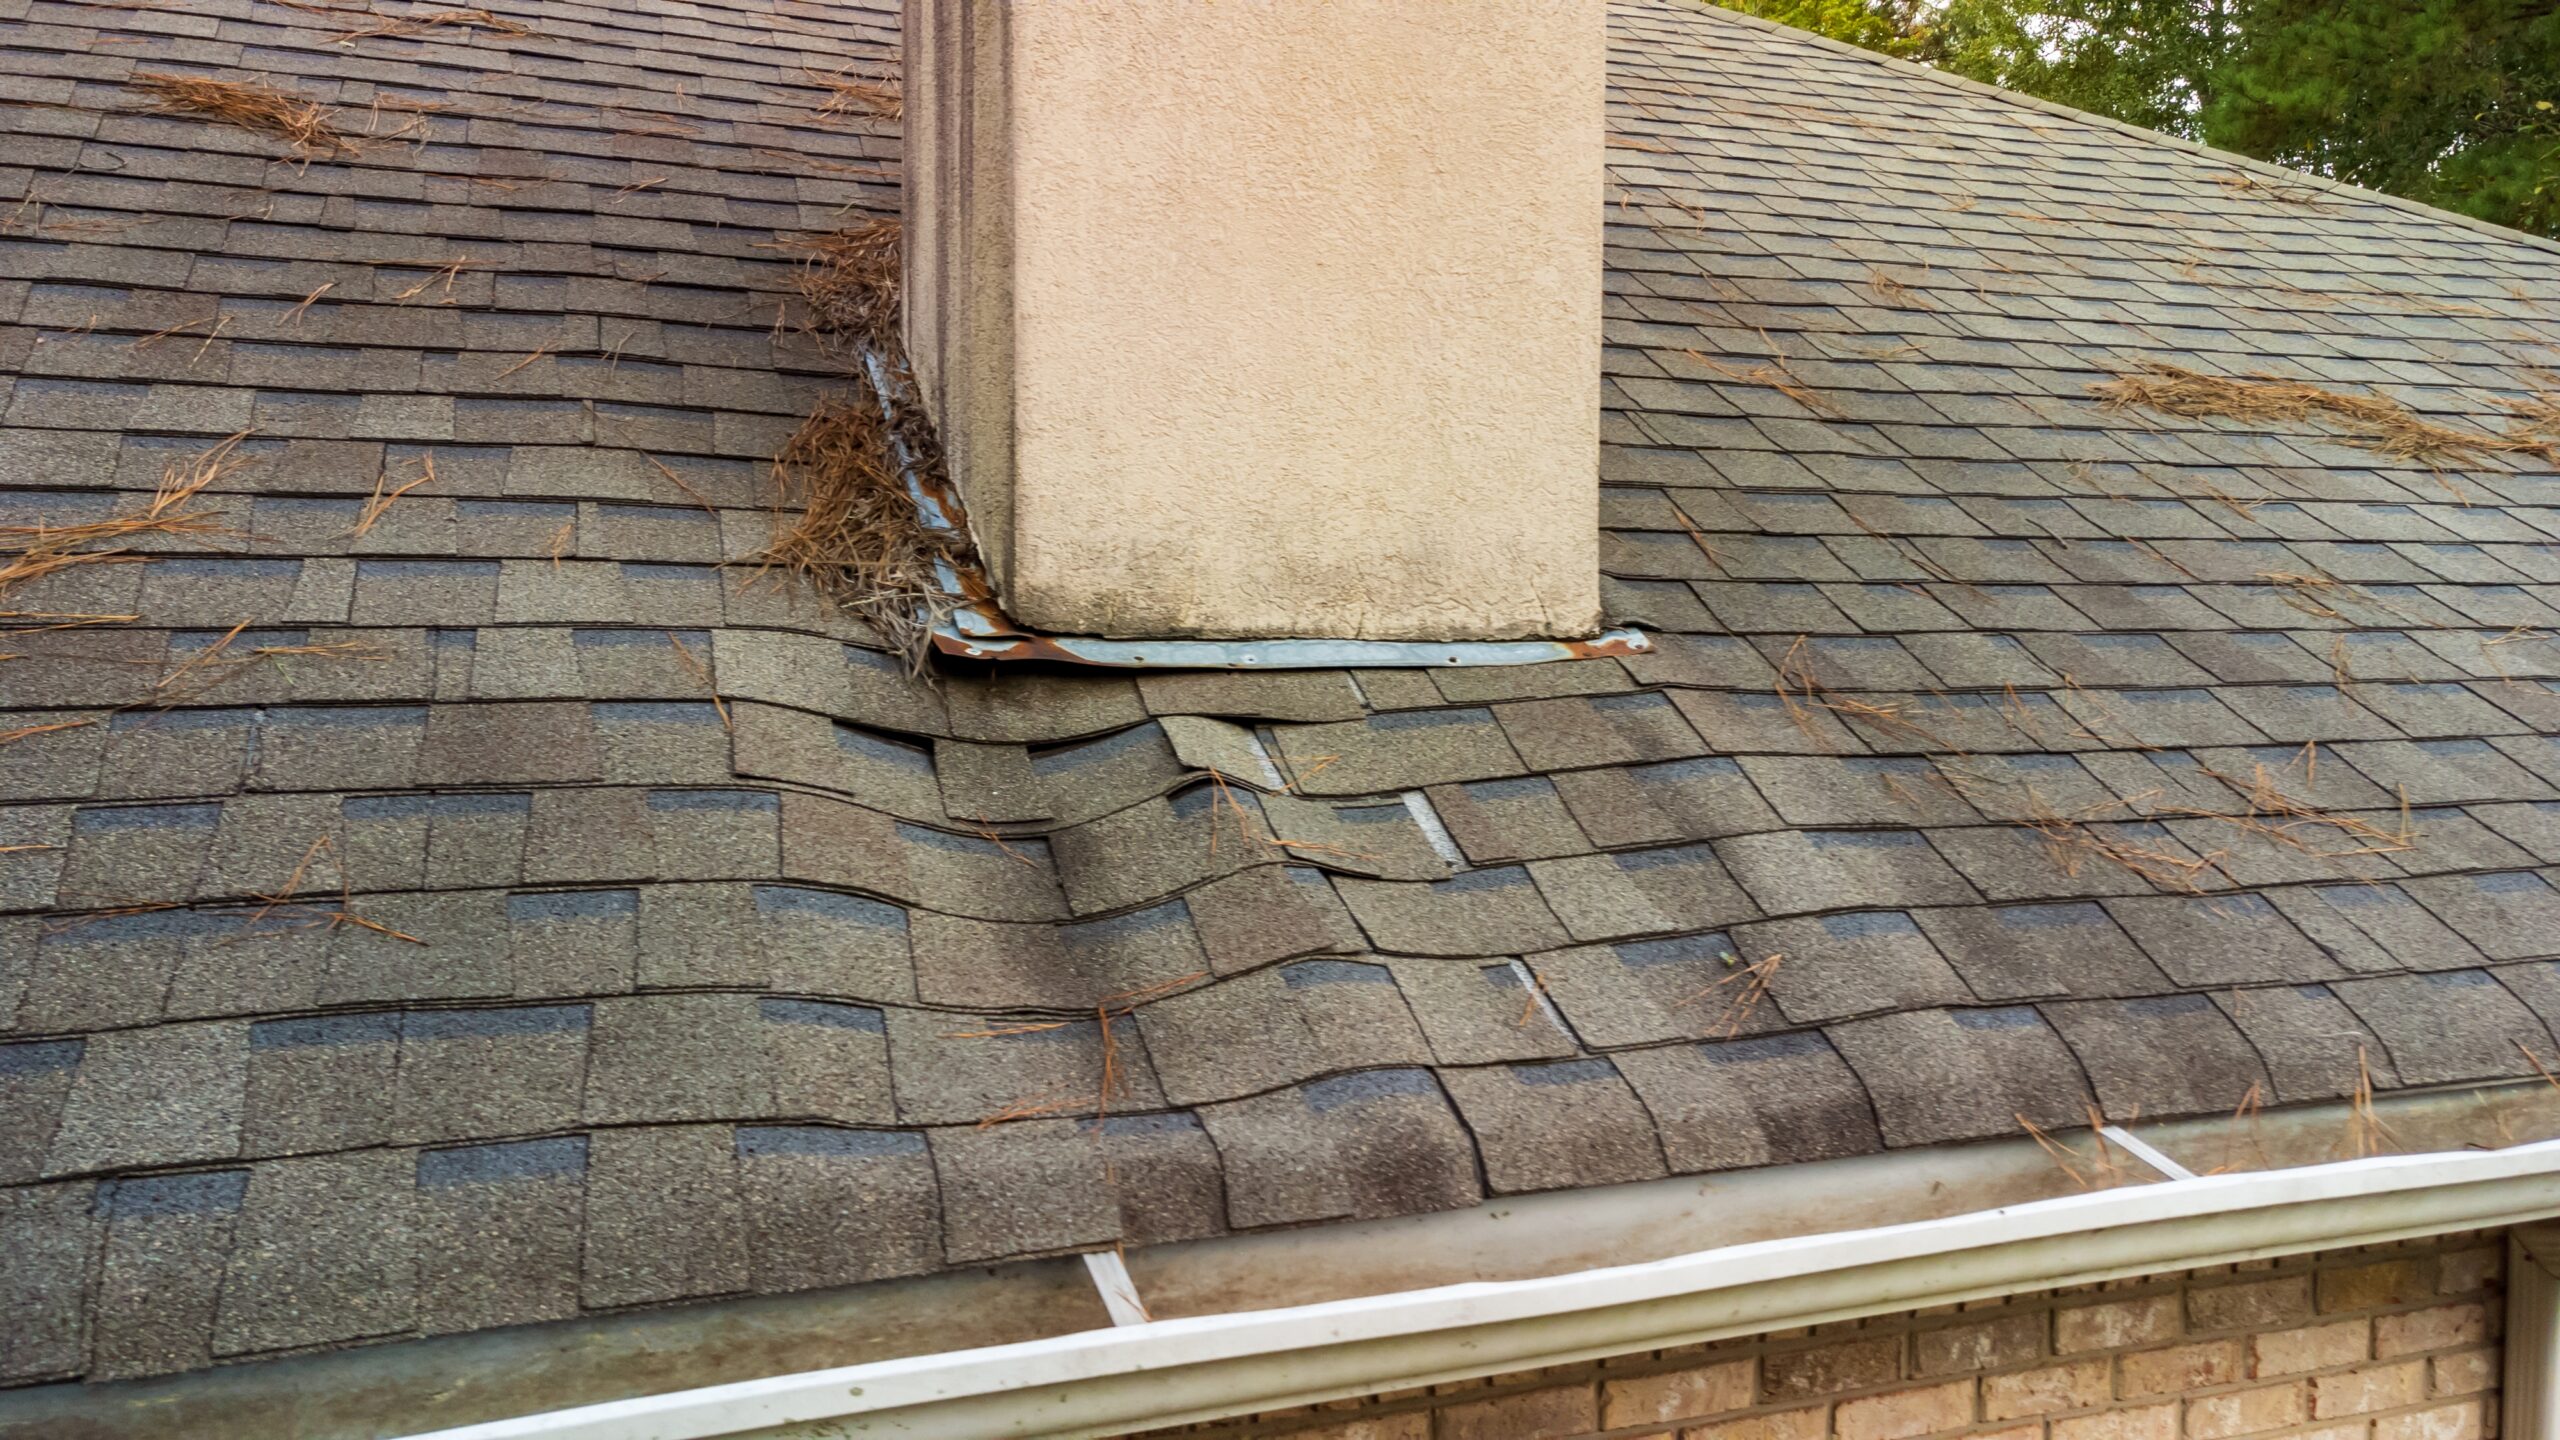 Leaks can cause warping and sagging in a roof